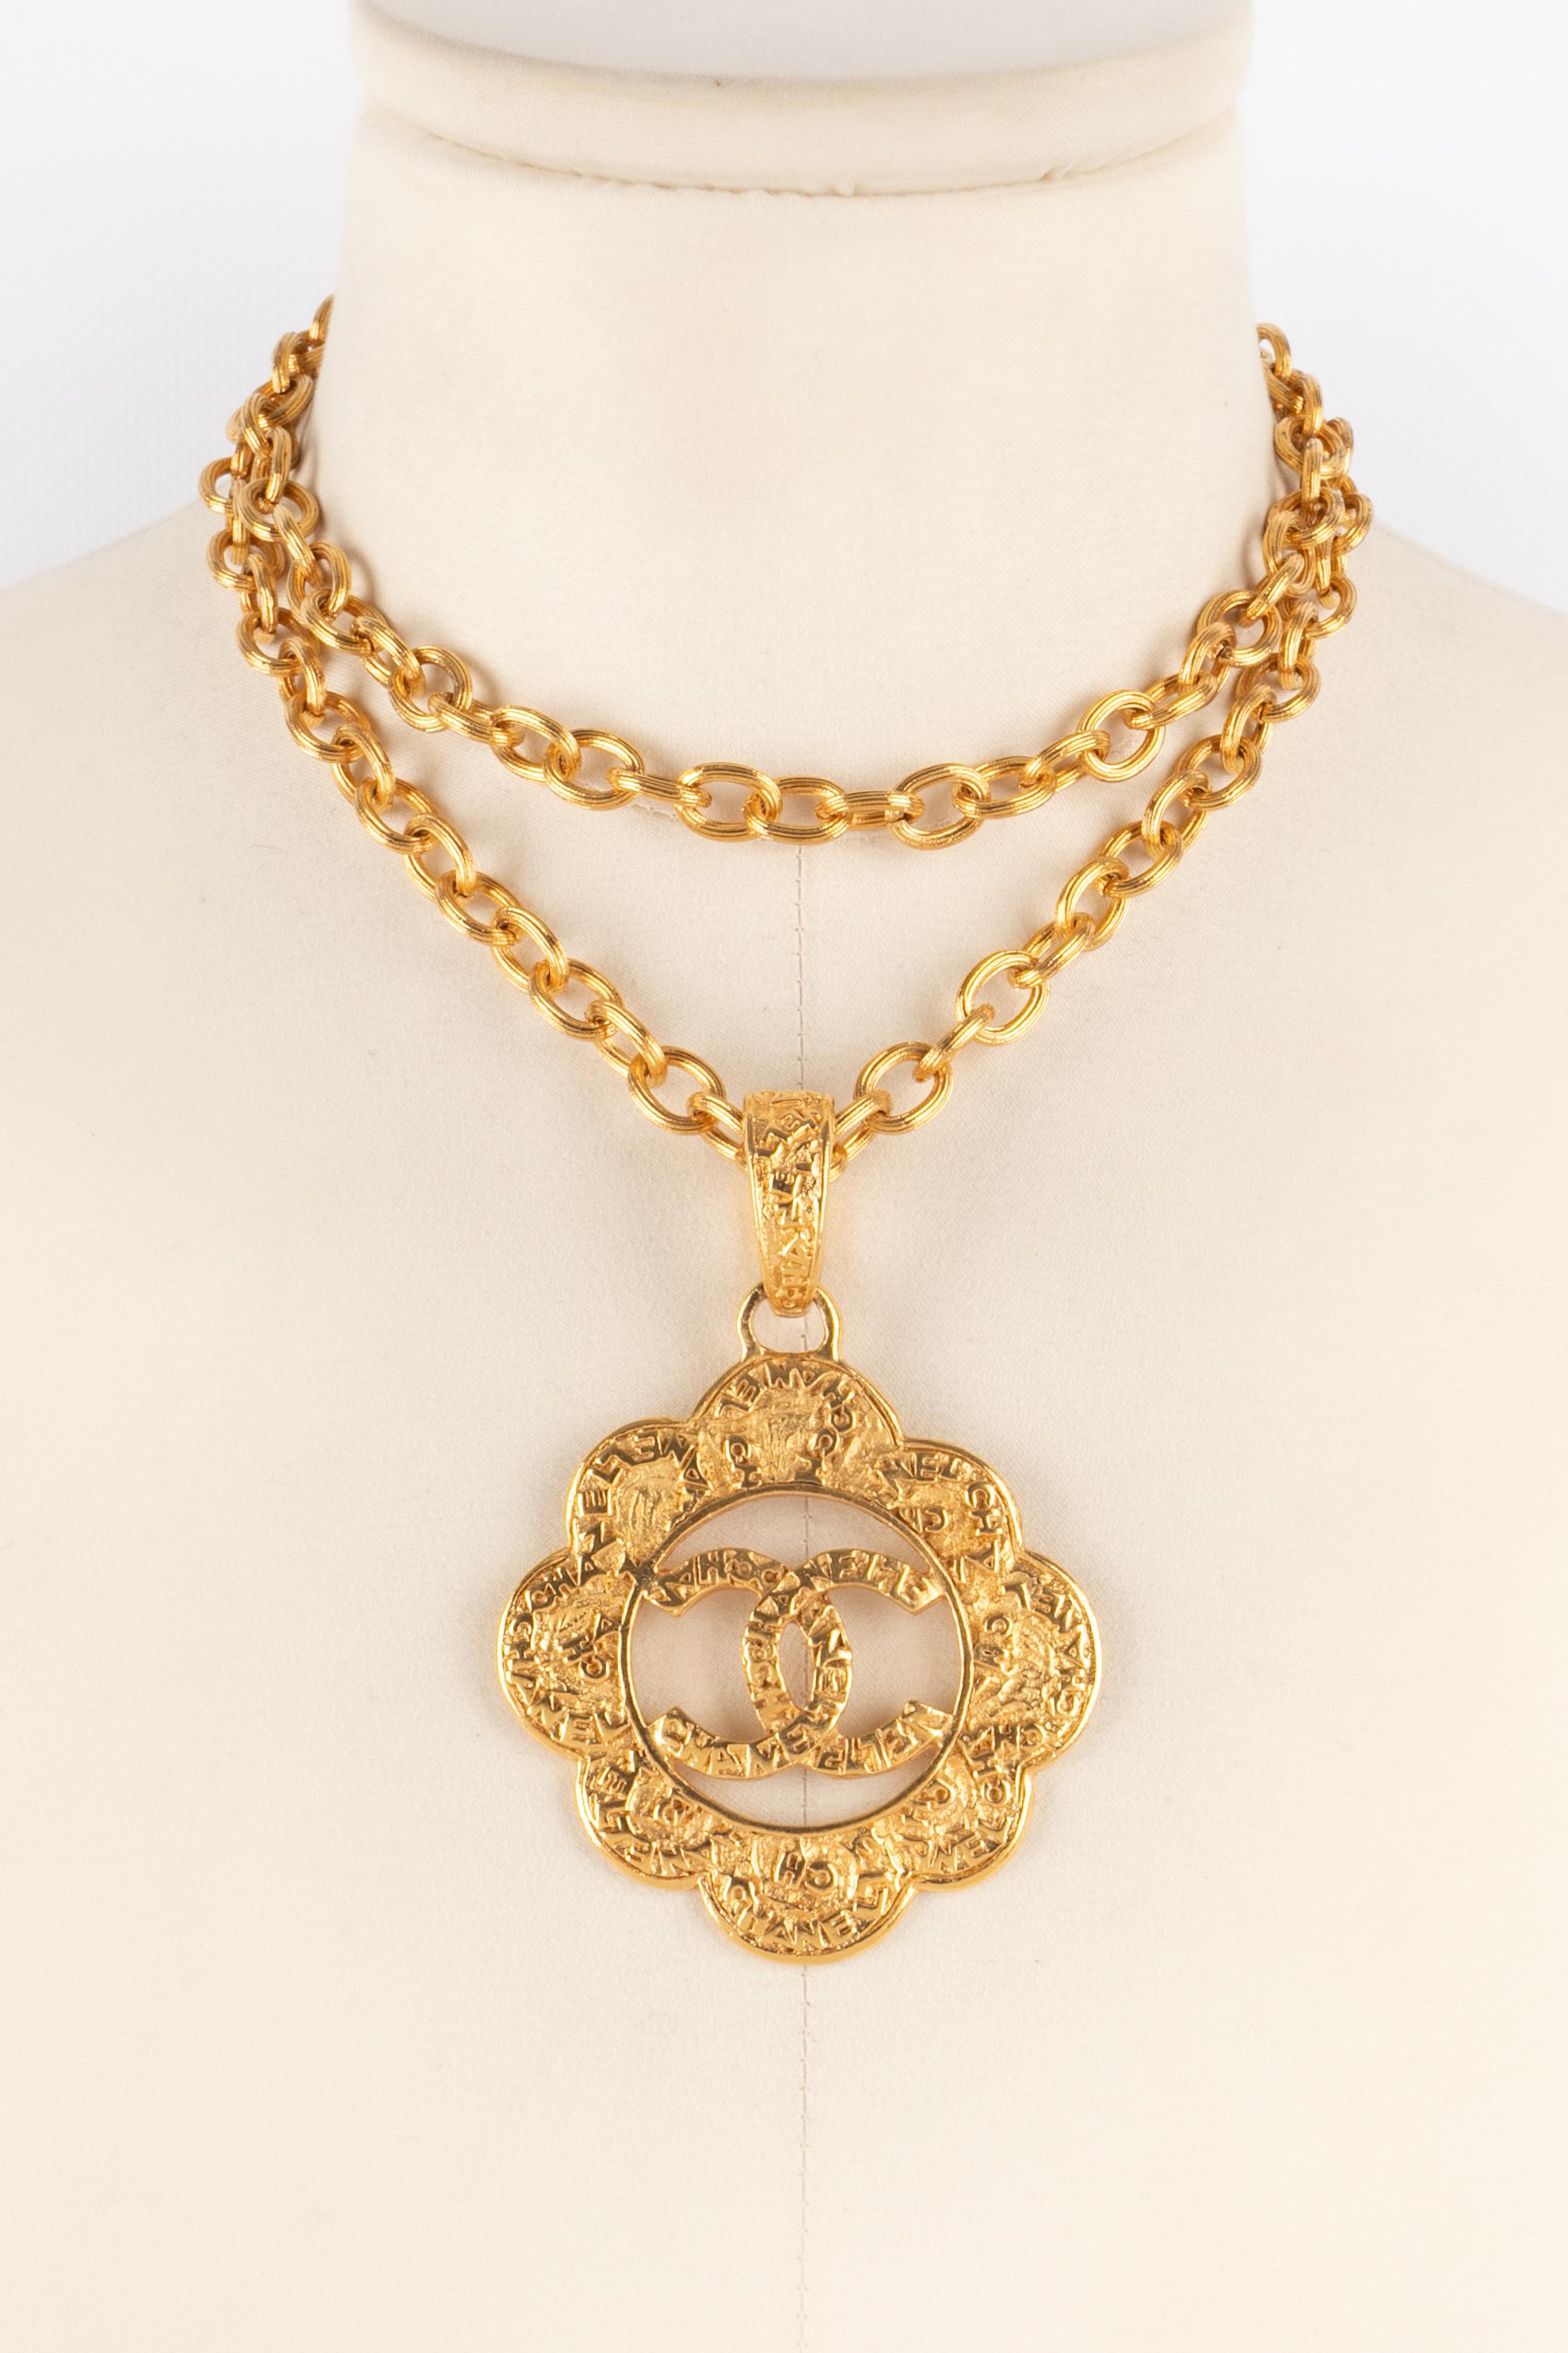 Women's Chanel necklace Fall 1995